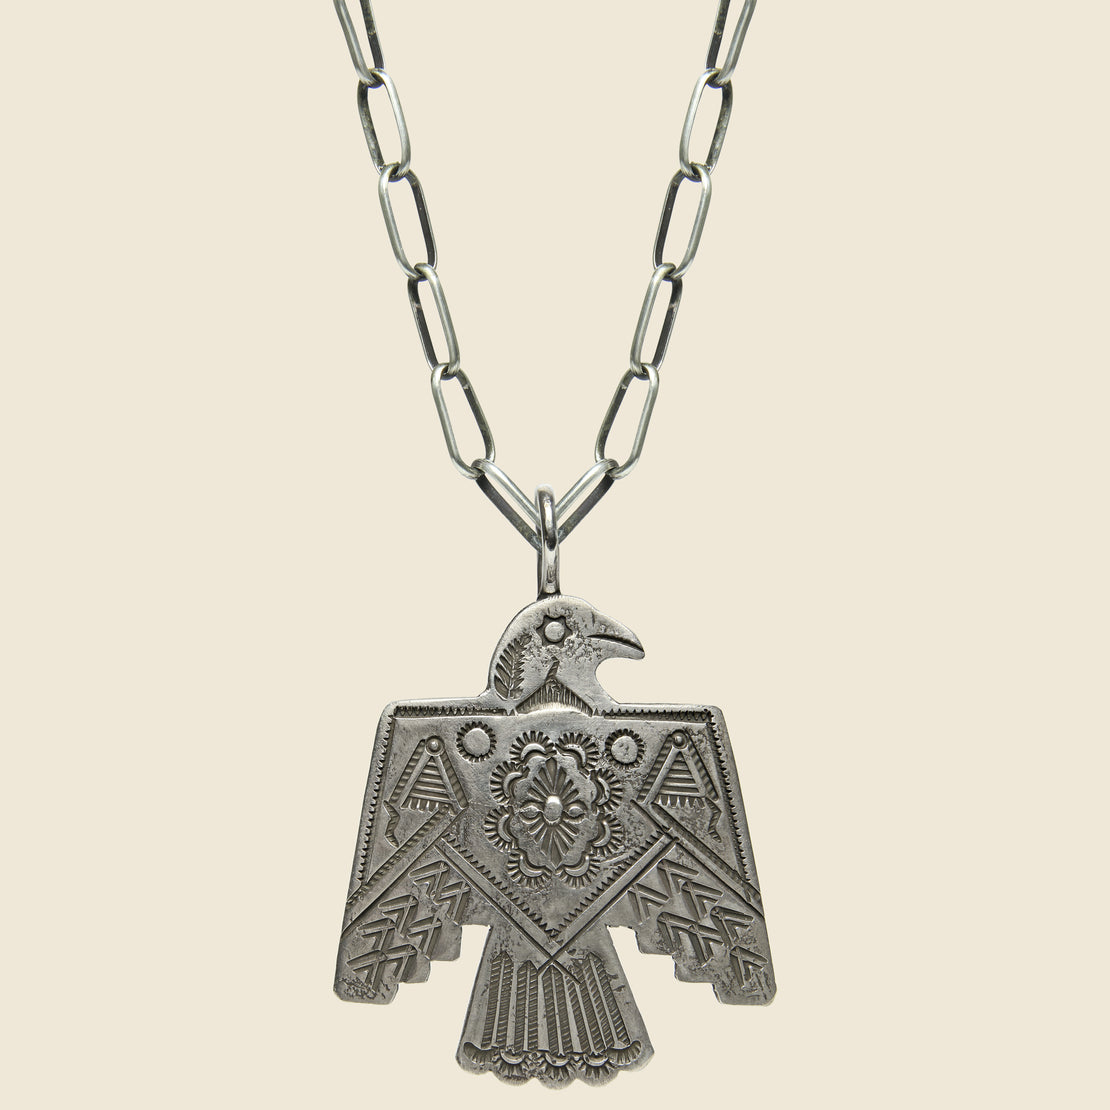 Smith Bros. Trading Co. Large Geometric Thunderbird Pendant Necklace - Sterling Silver